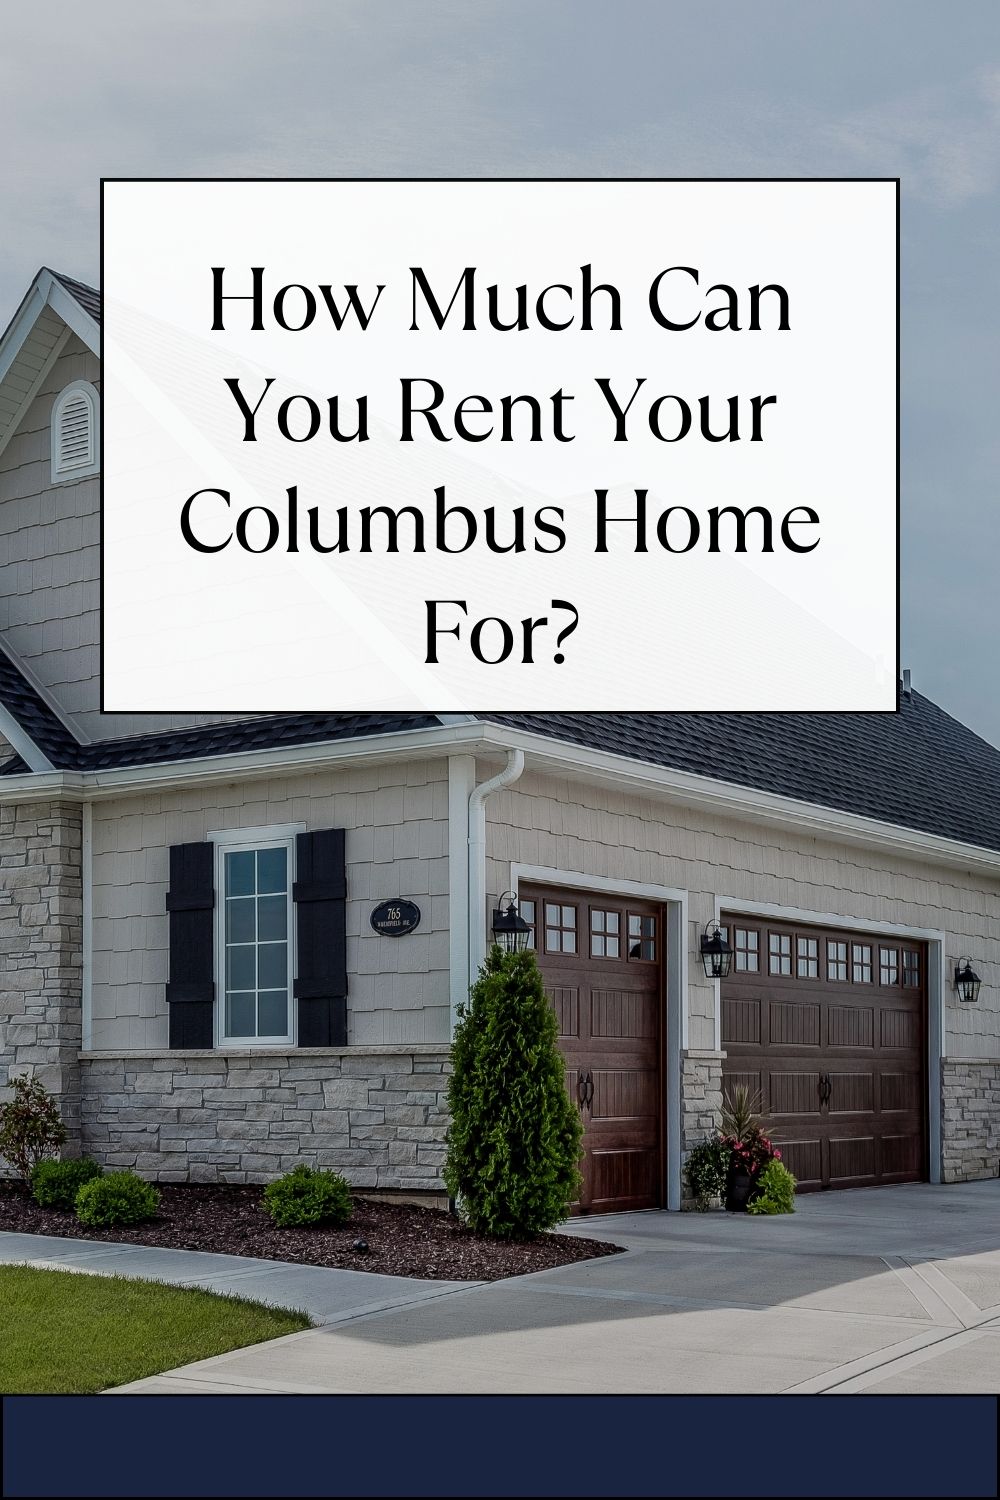 How Much Can You Rent Your Columbus Home For?